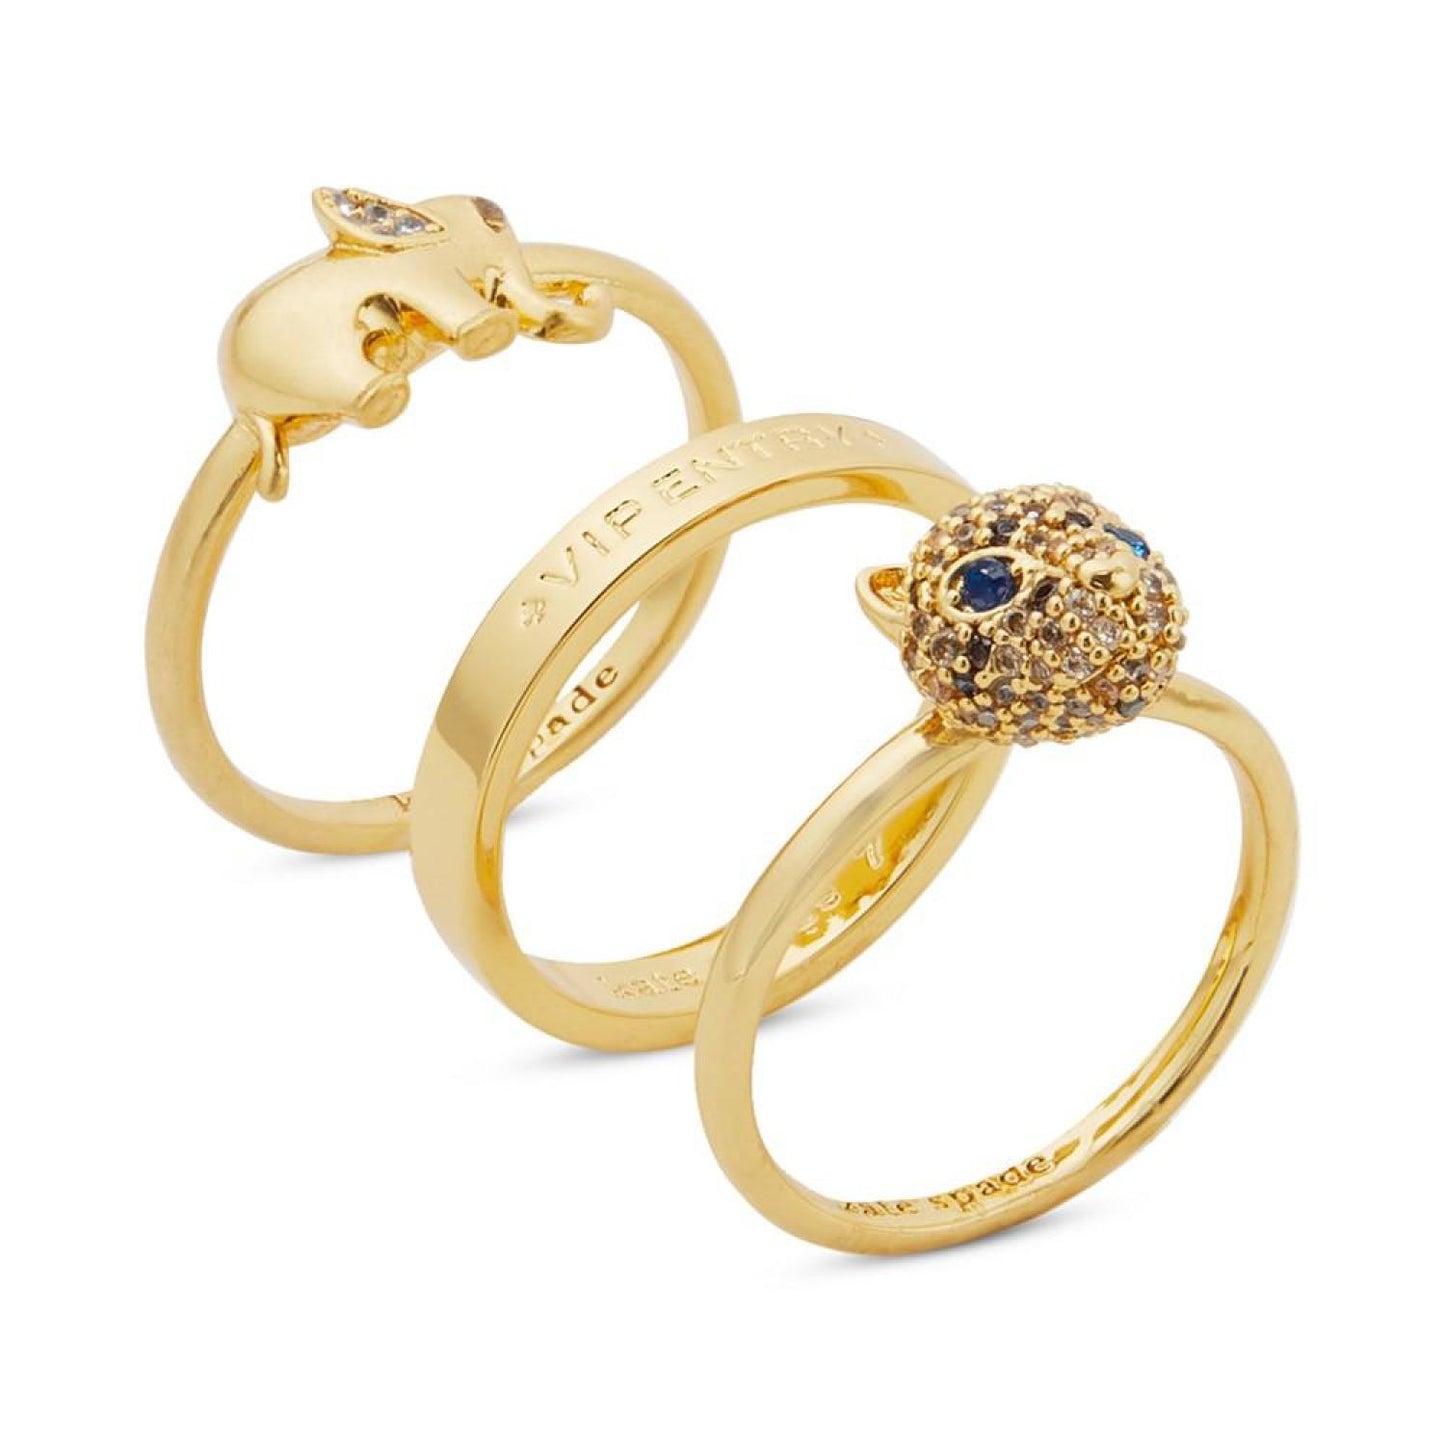 Gold-Tone 3-Pc. Set Crystal Elephant & Tiger Stack Rings